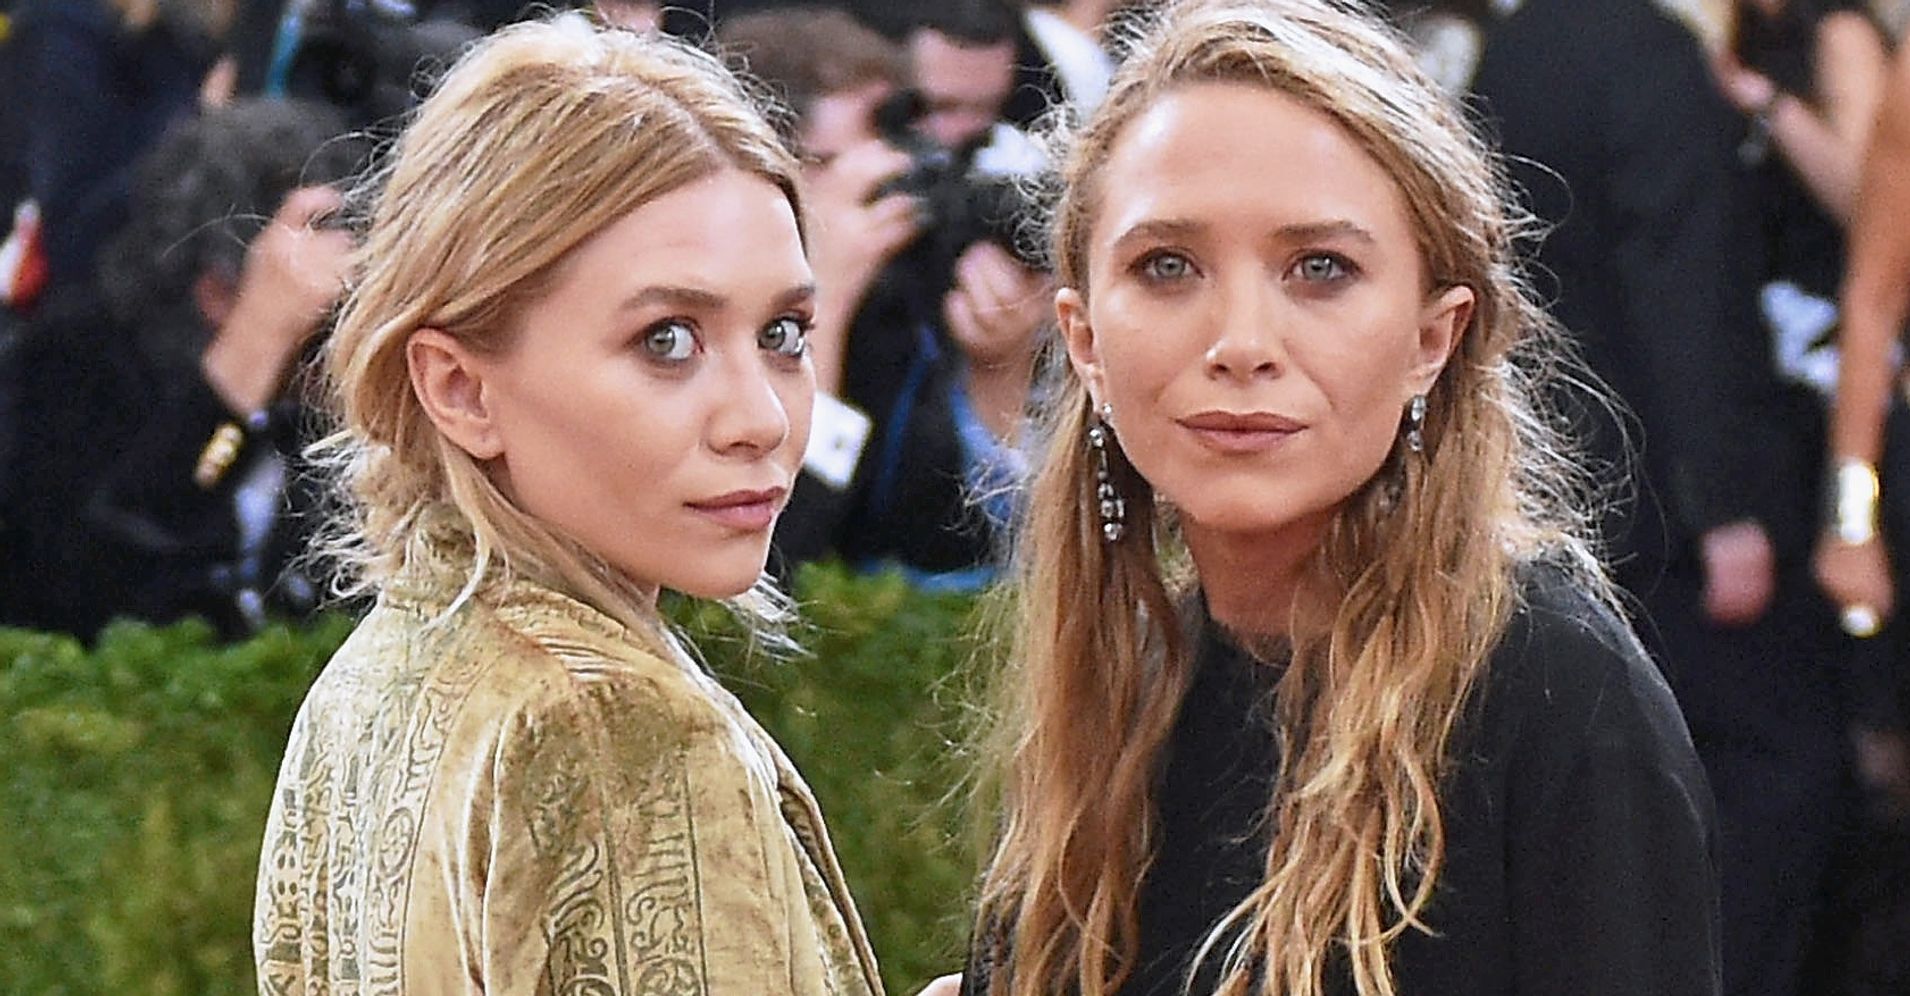 The Olsen Twins Reportedly Settle Lawsuit With Former Interns